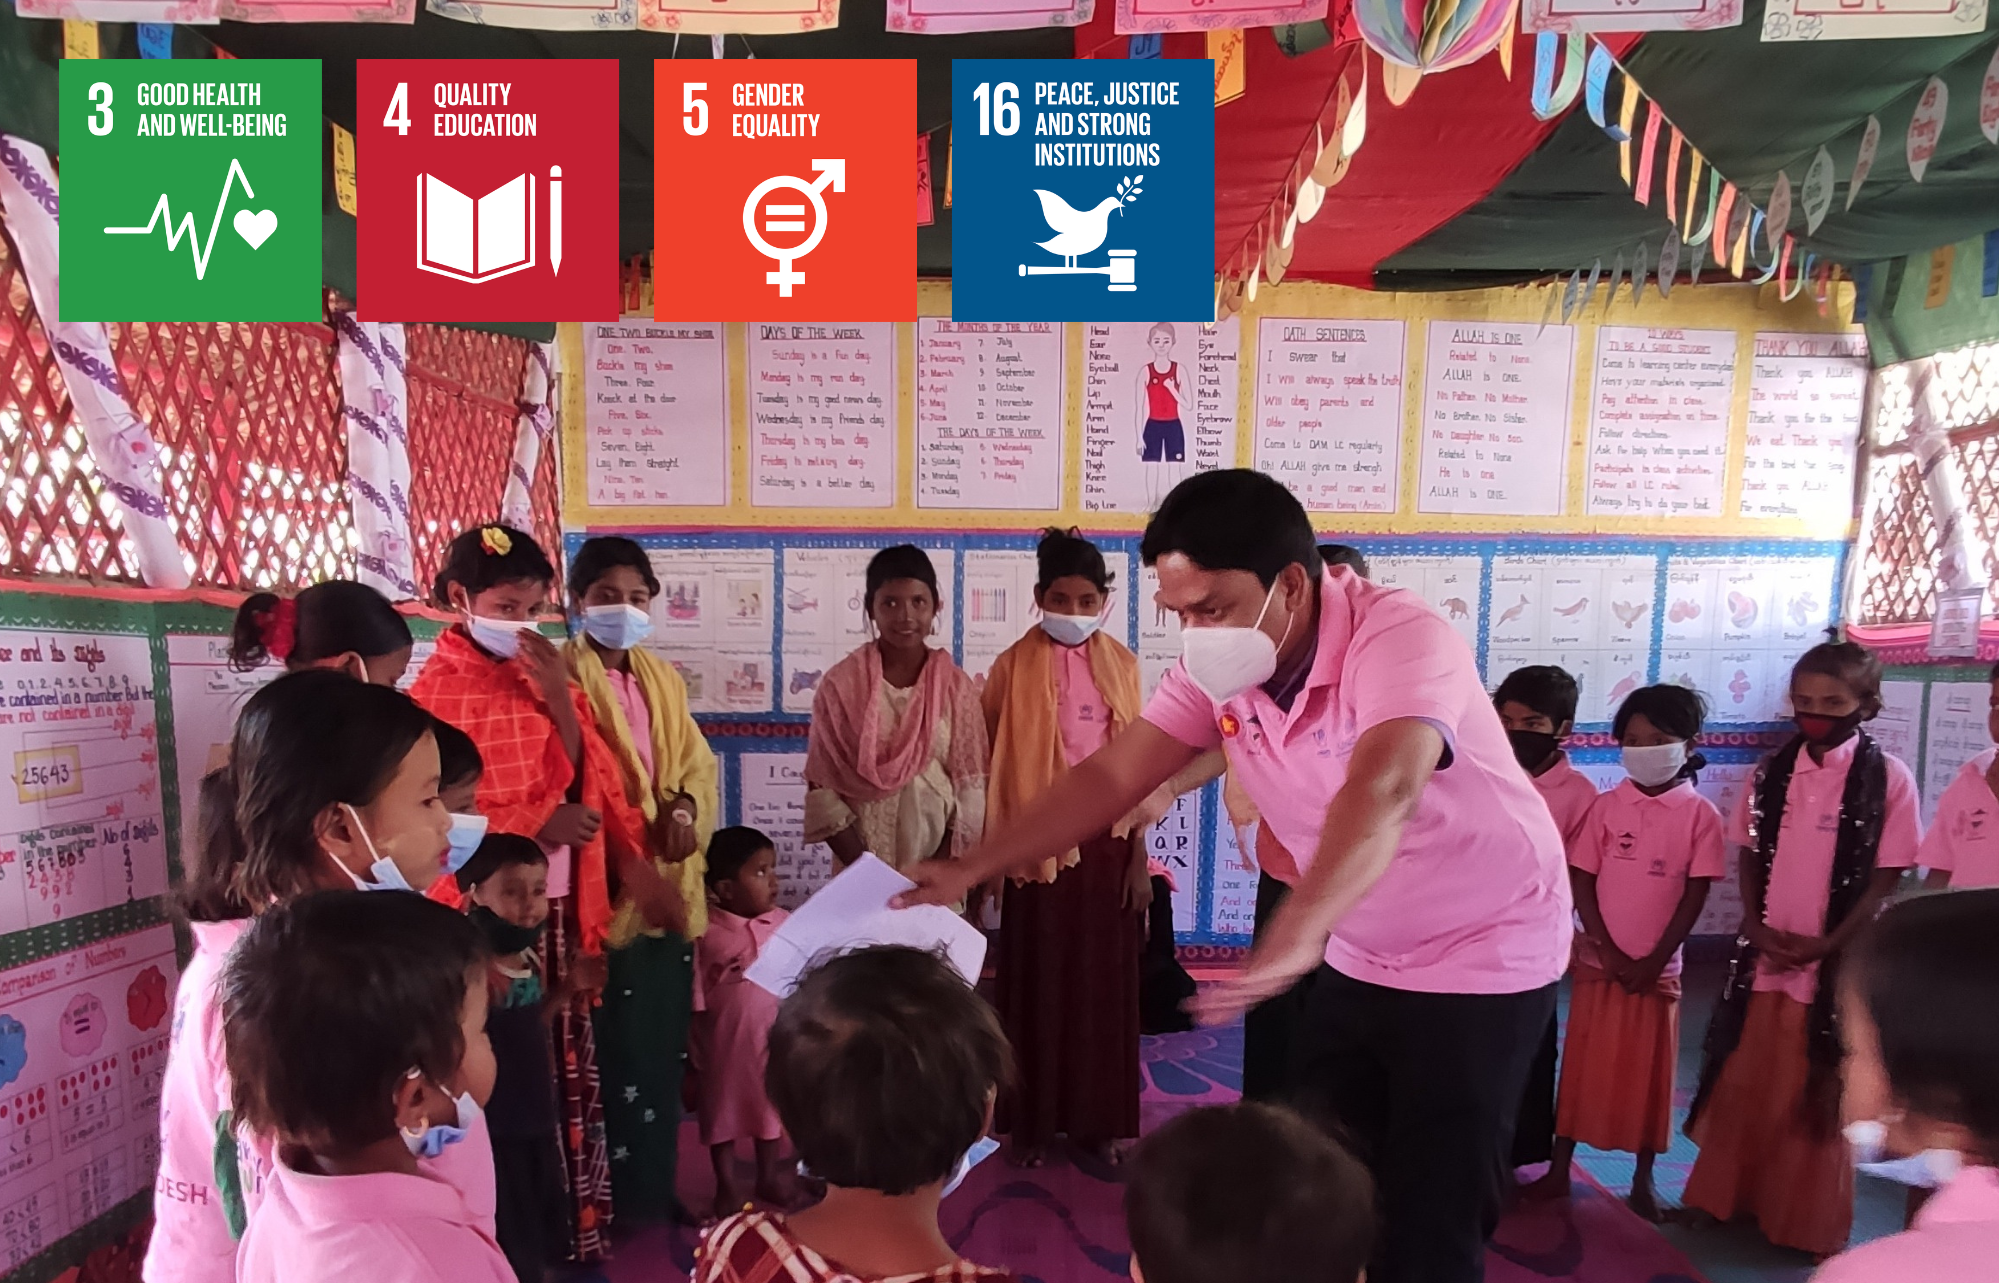 Children in a classroom setting wearing pink shirts being led through a training by an instructor. The SDG logos for SDG 3, SDG 4, SDG 5 and SDG 16 are also featured in the image. 